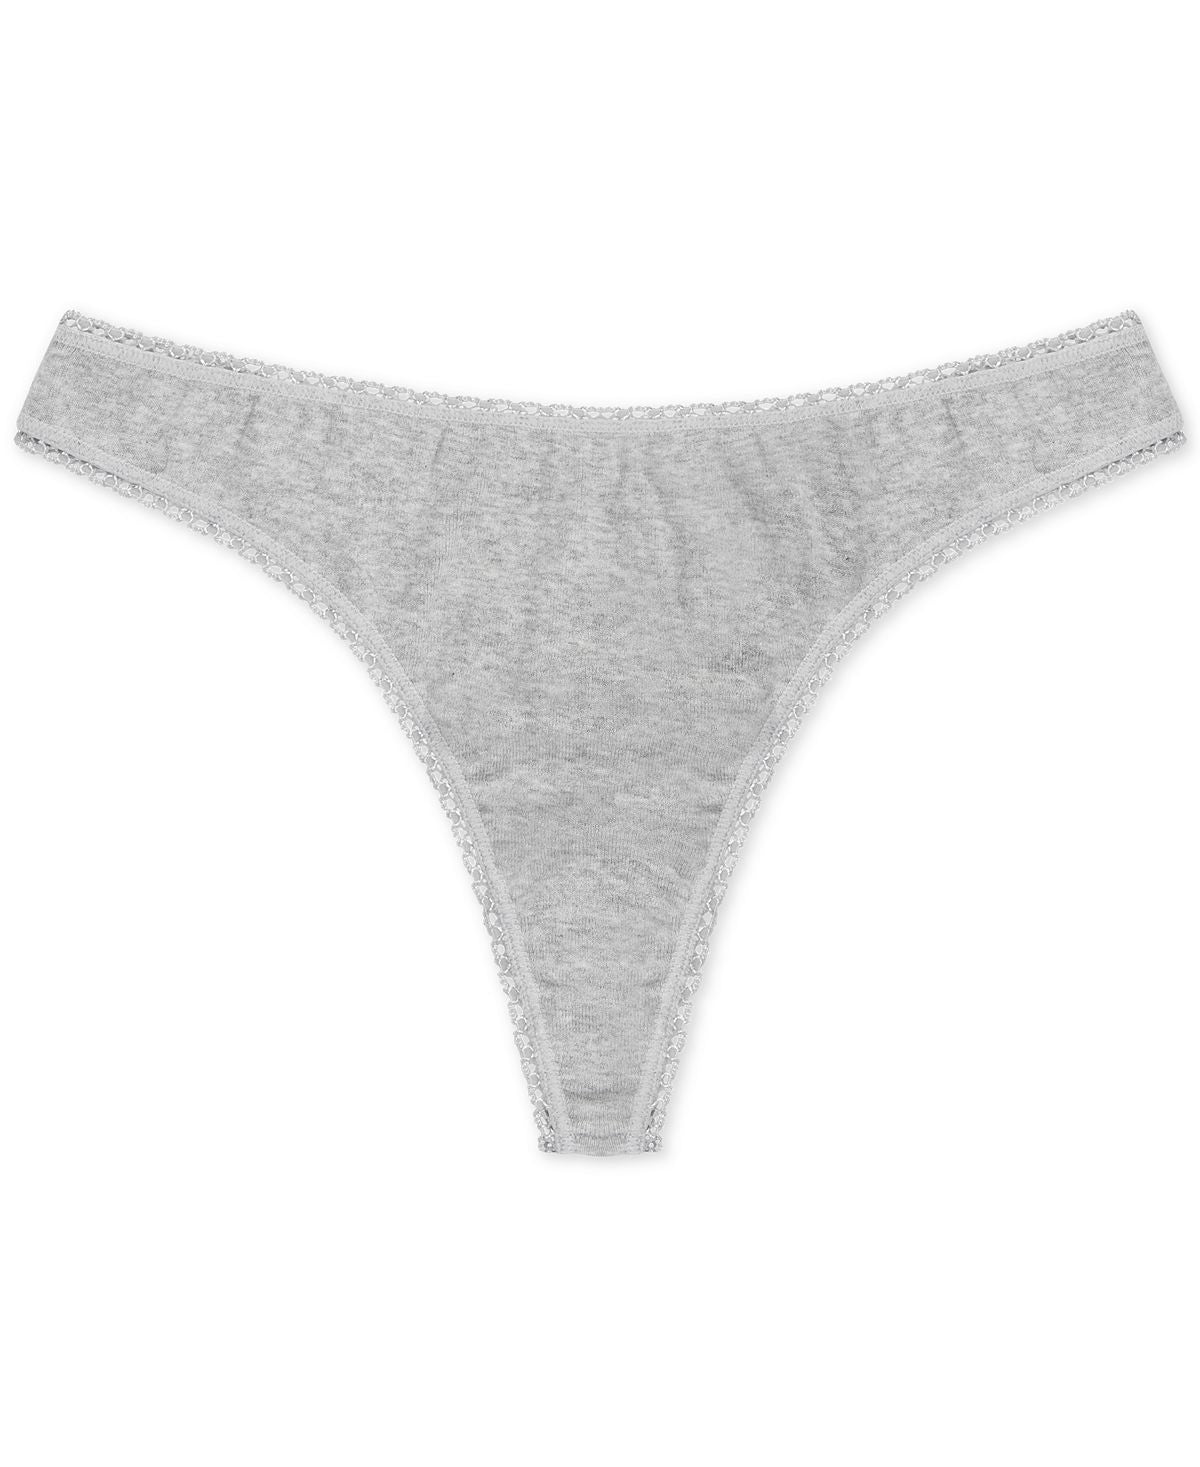 Charter Club Everyday Cotton Wo Lace-trim Thong Hthr Storm